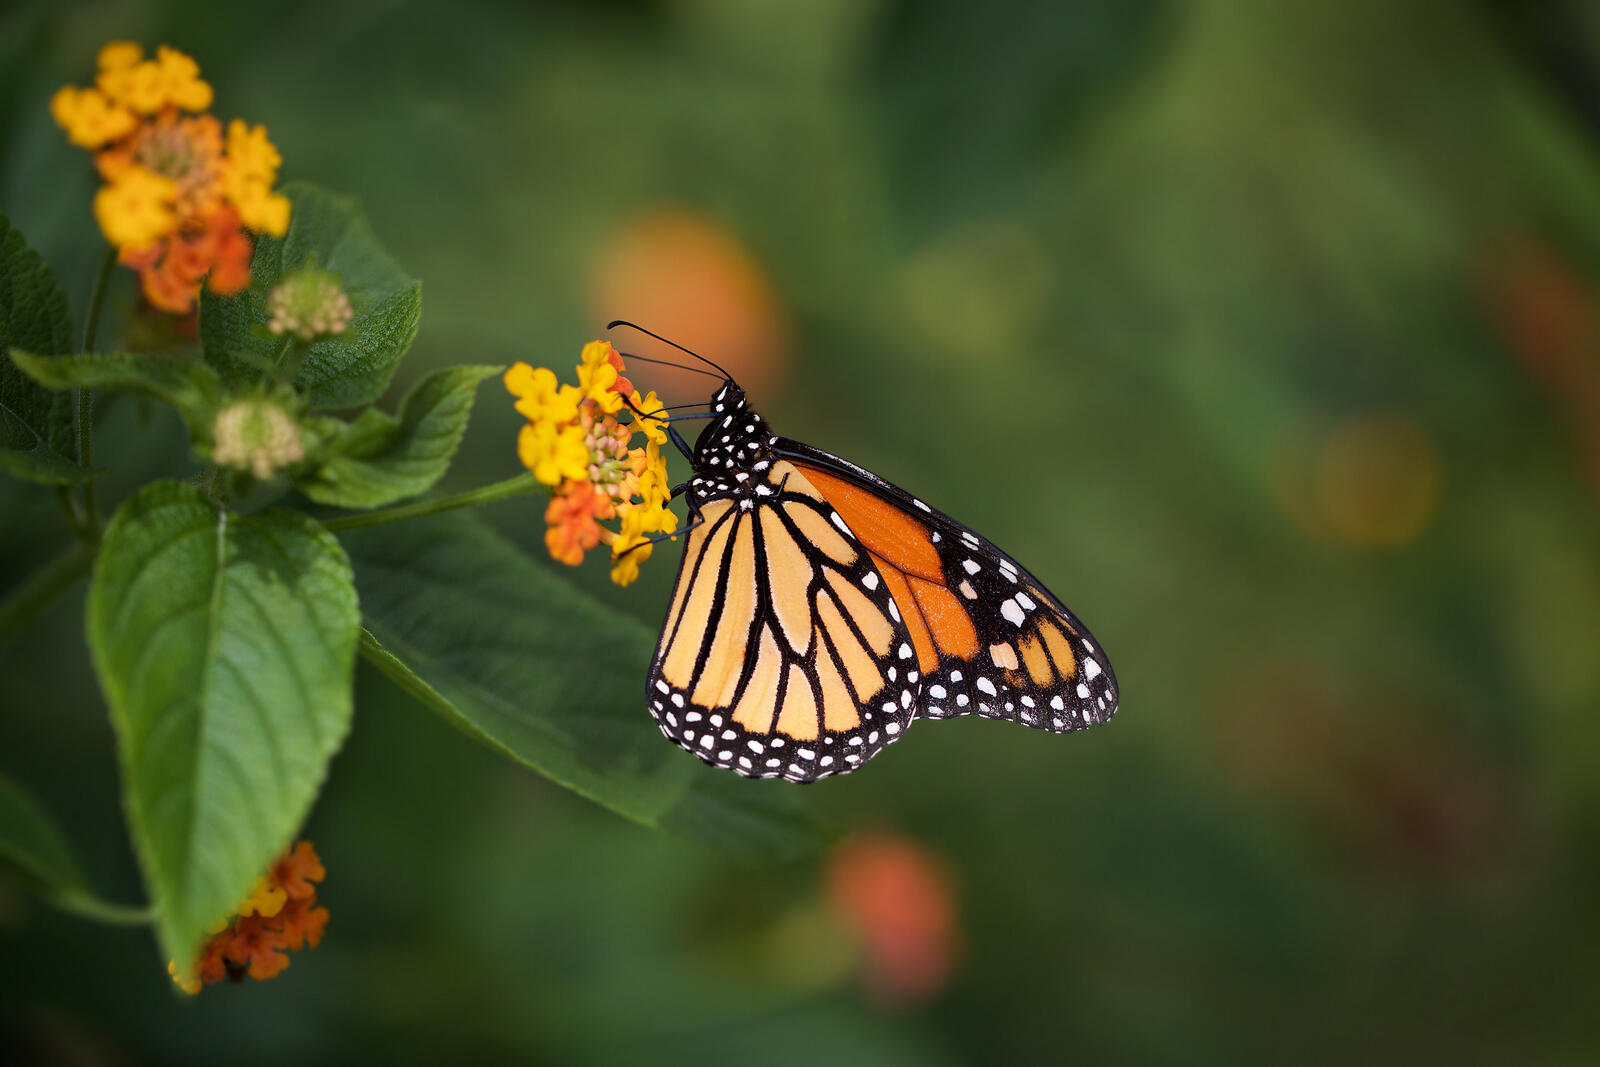 Wallpapers animal monarch butterfly insects on the desktop